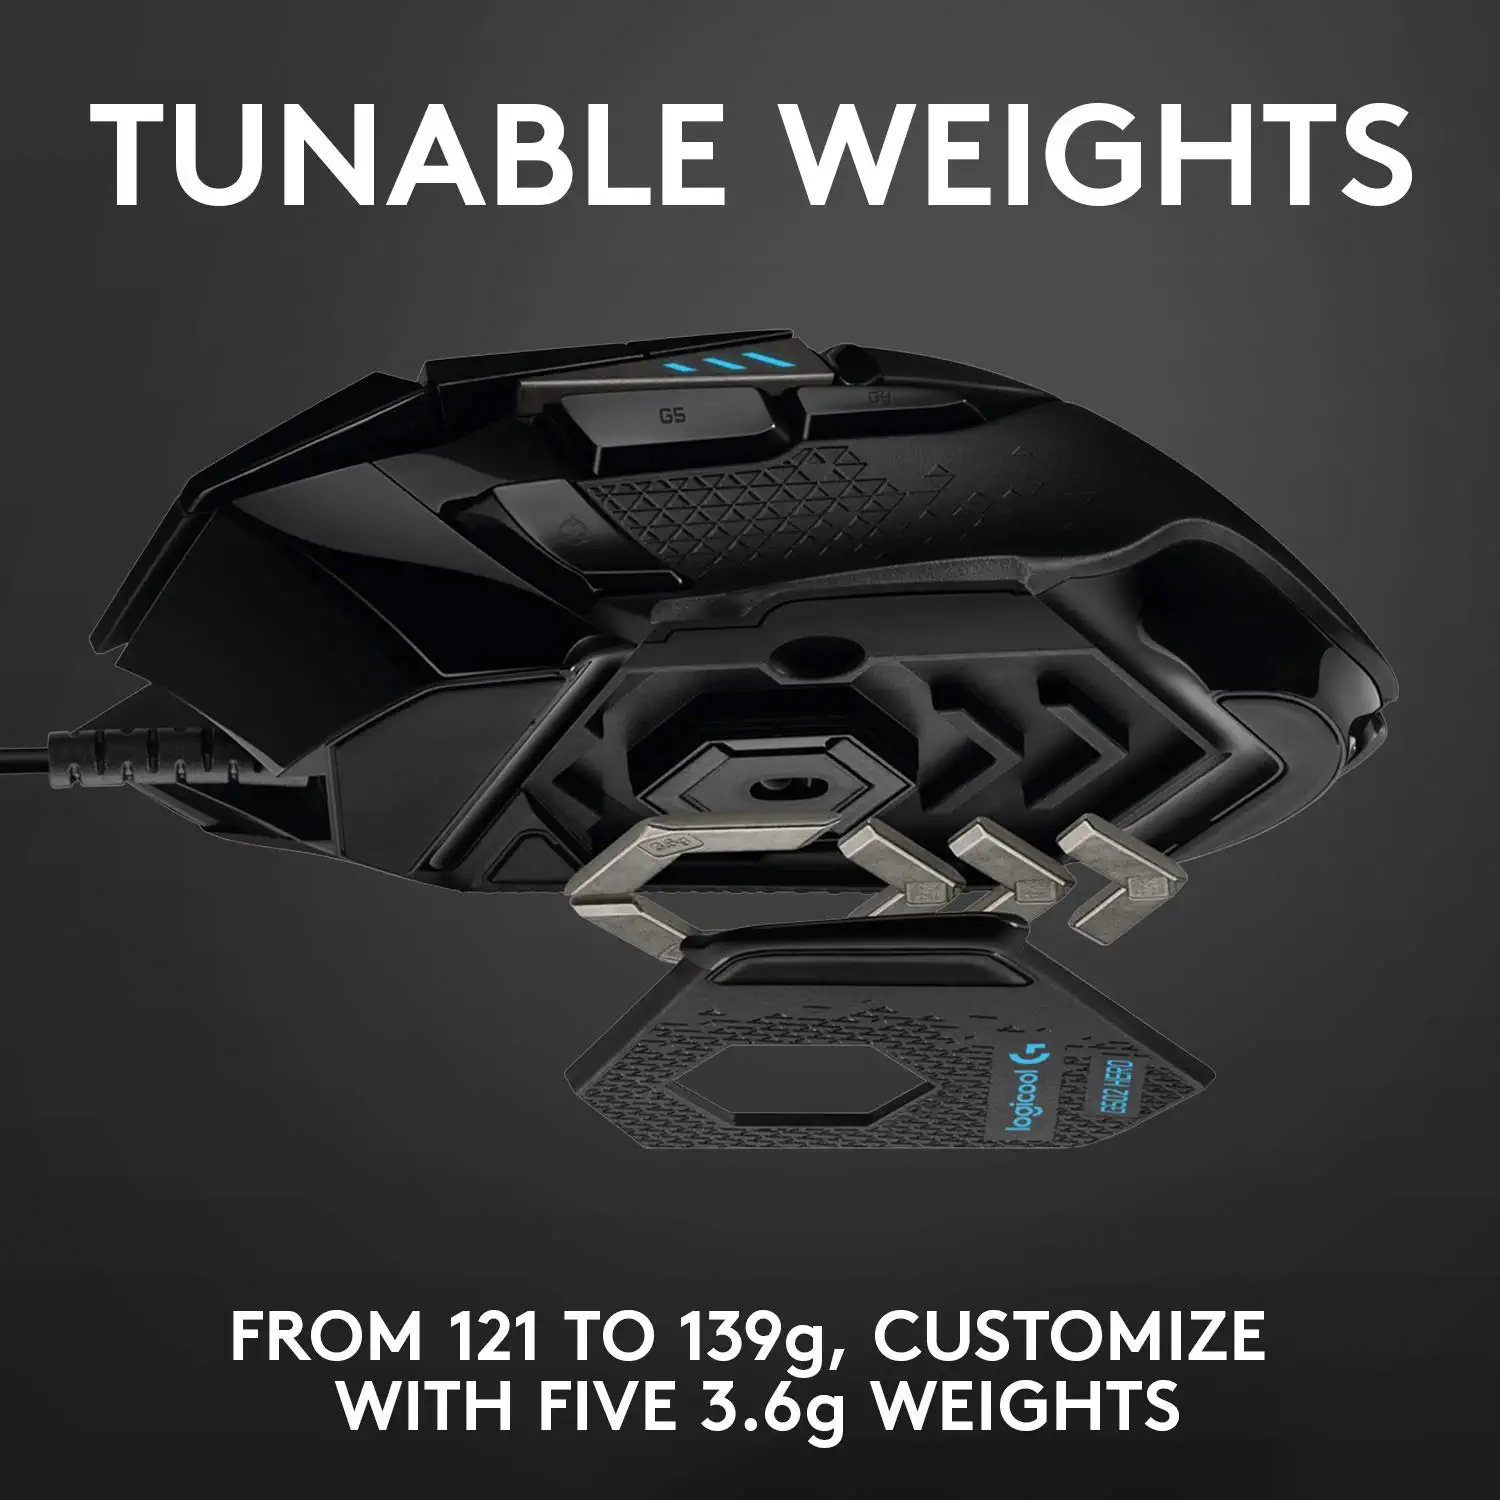 A gaming mouse could even have a feature that allows you to add or remove weight to suit various games and gaming styles.